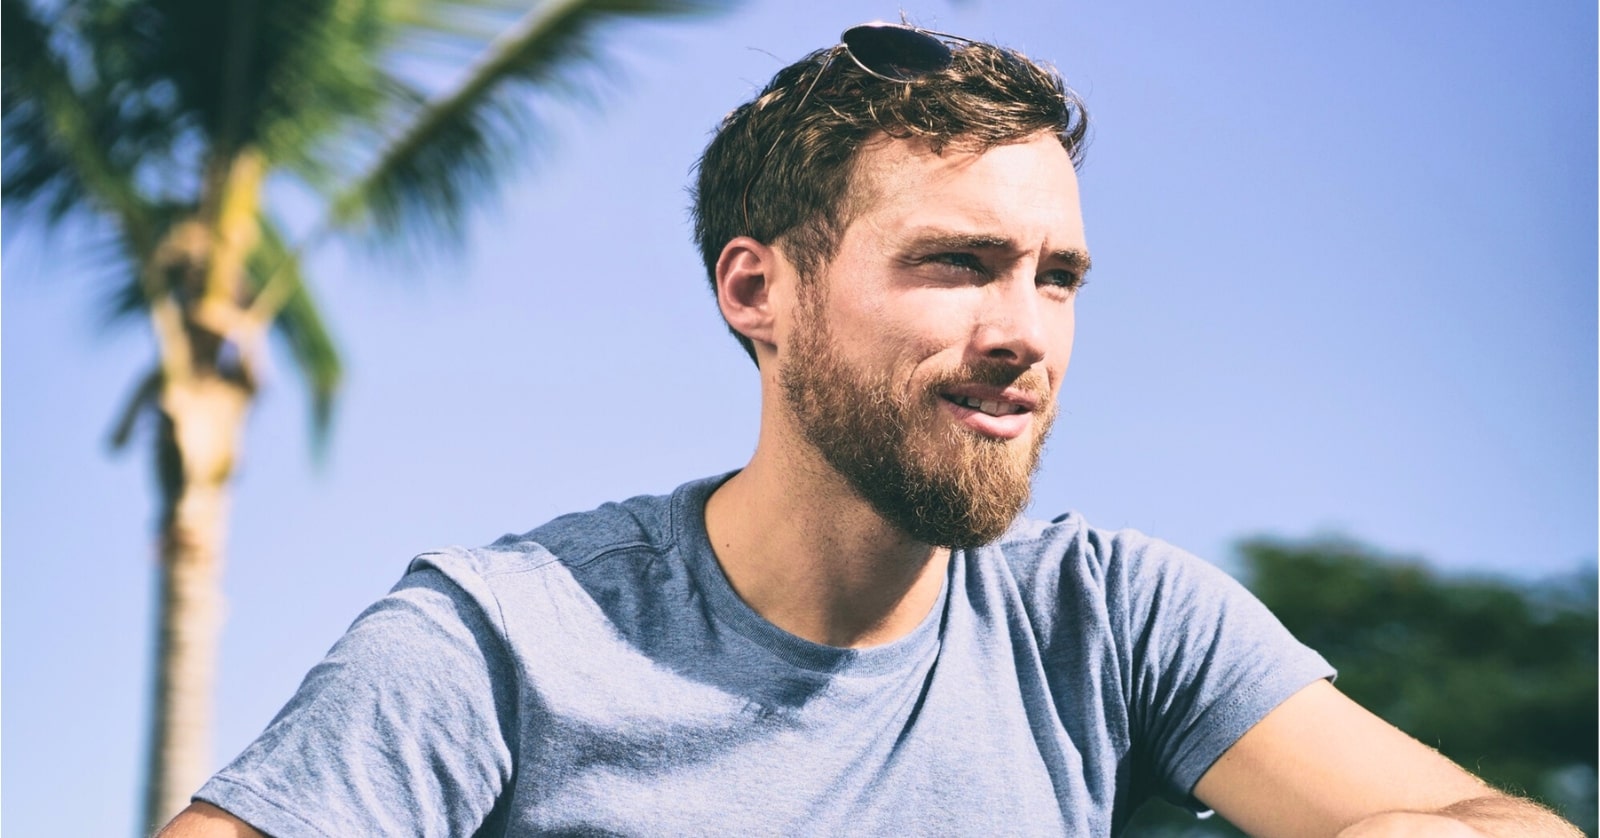 A man with a beard and sunglasses resting on his head sits outdoors against a clear blue sky. He wears a light blue t-shirt, and a palm tree is visible in the background, giving the scene a tropical feel. He appears to be looking off into the distance.